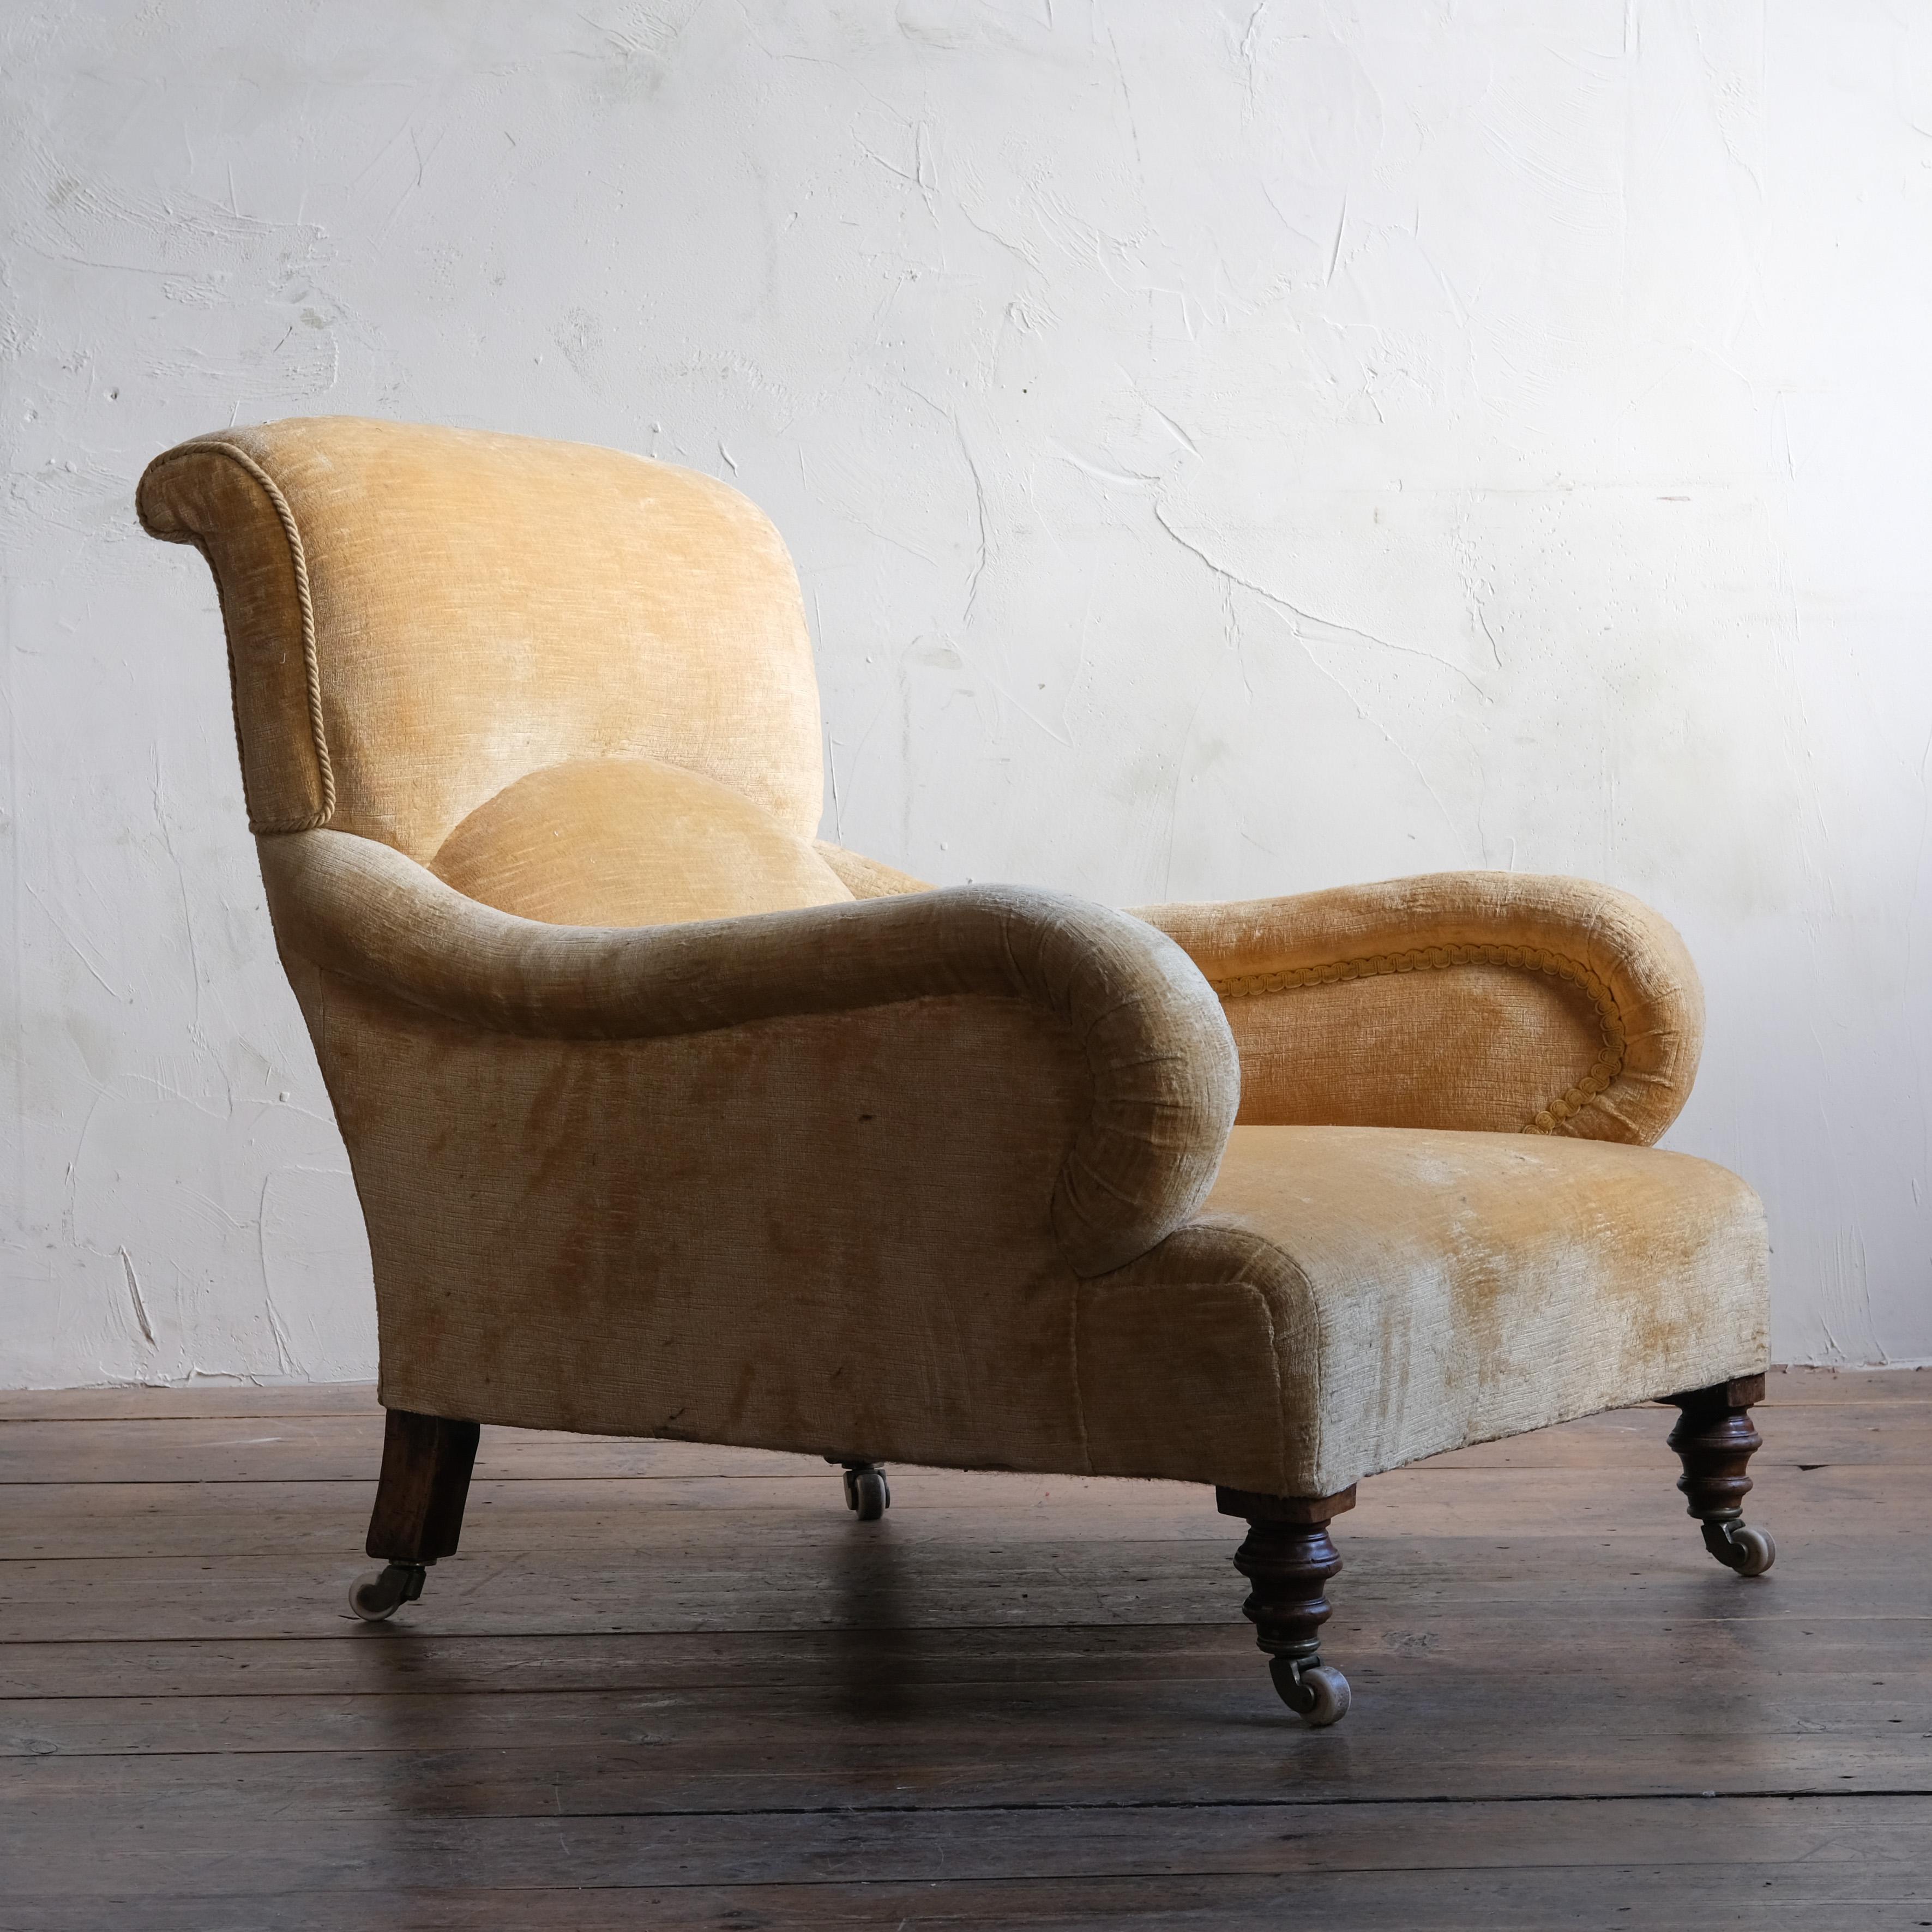 A late 19th century deep seated country house armchair raised on turned legs and the original brass casters. Structurally firm and the fabric is usable as is however we do offer upholstery should you wish

For upholstery

Measures: 78cm